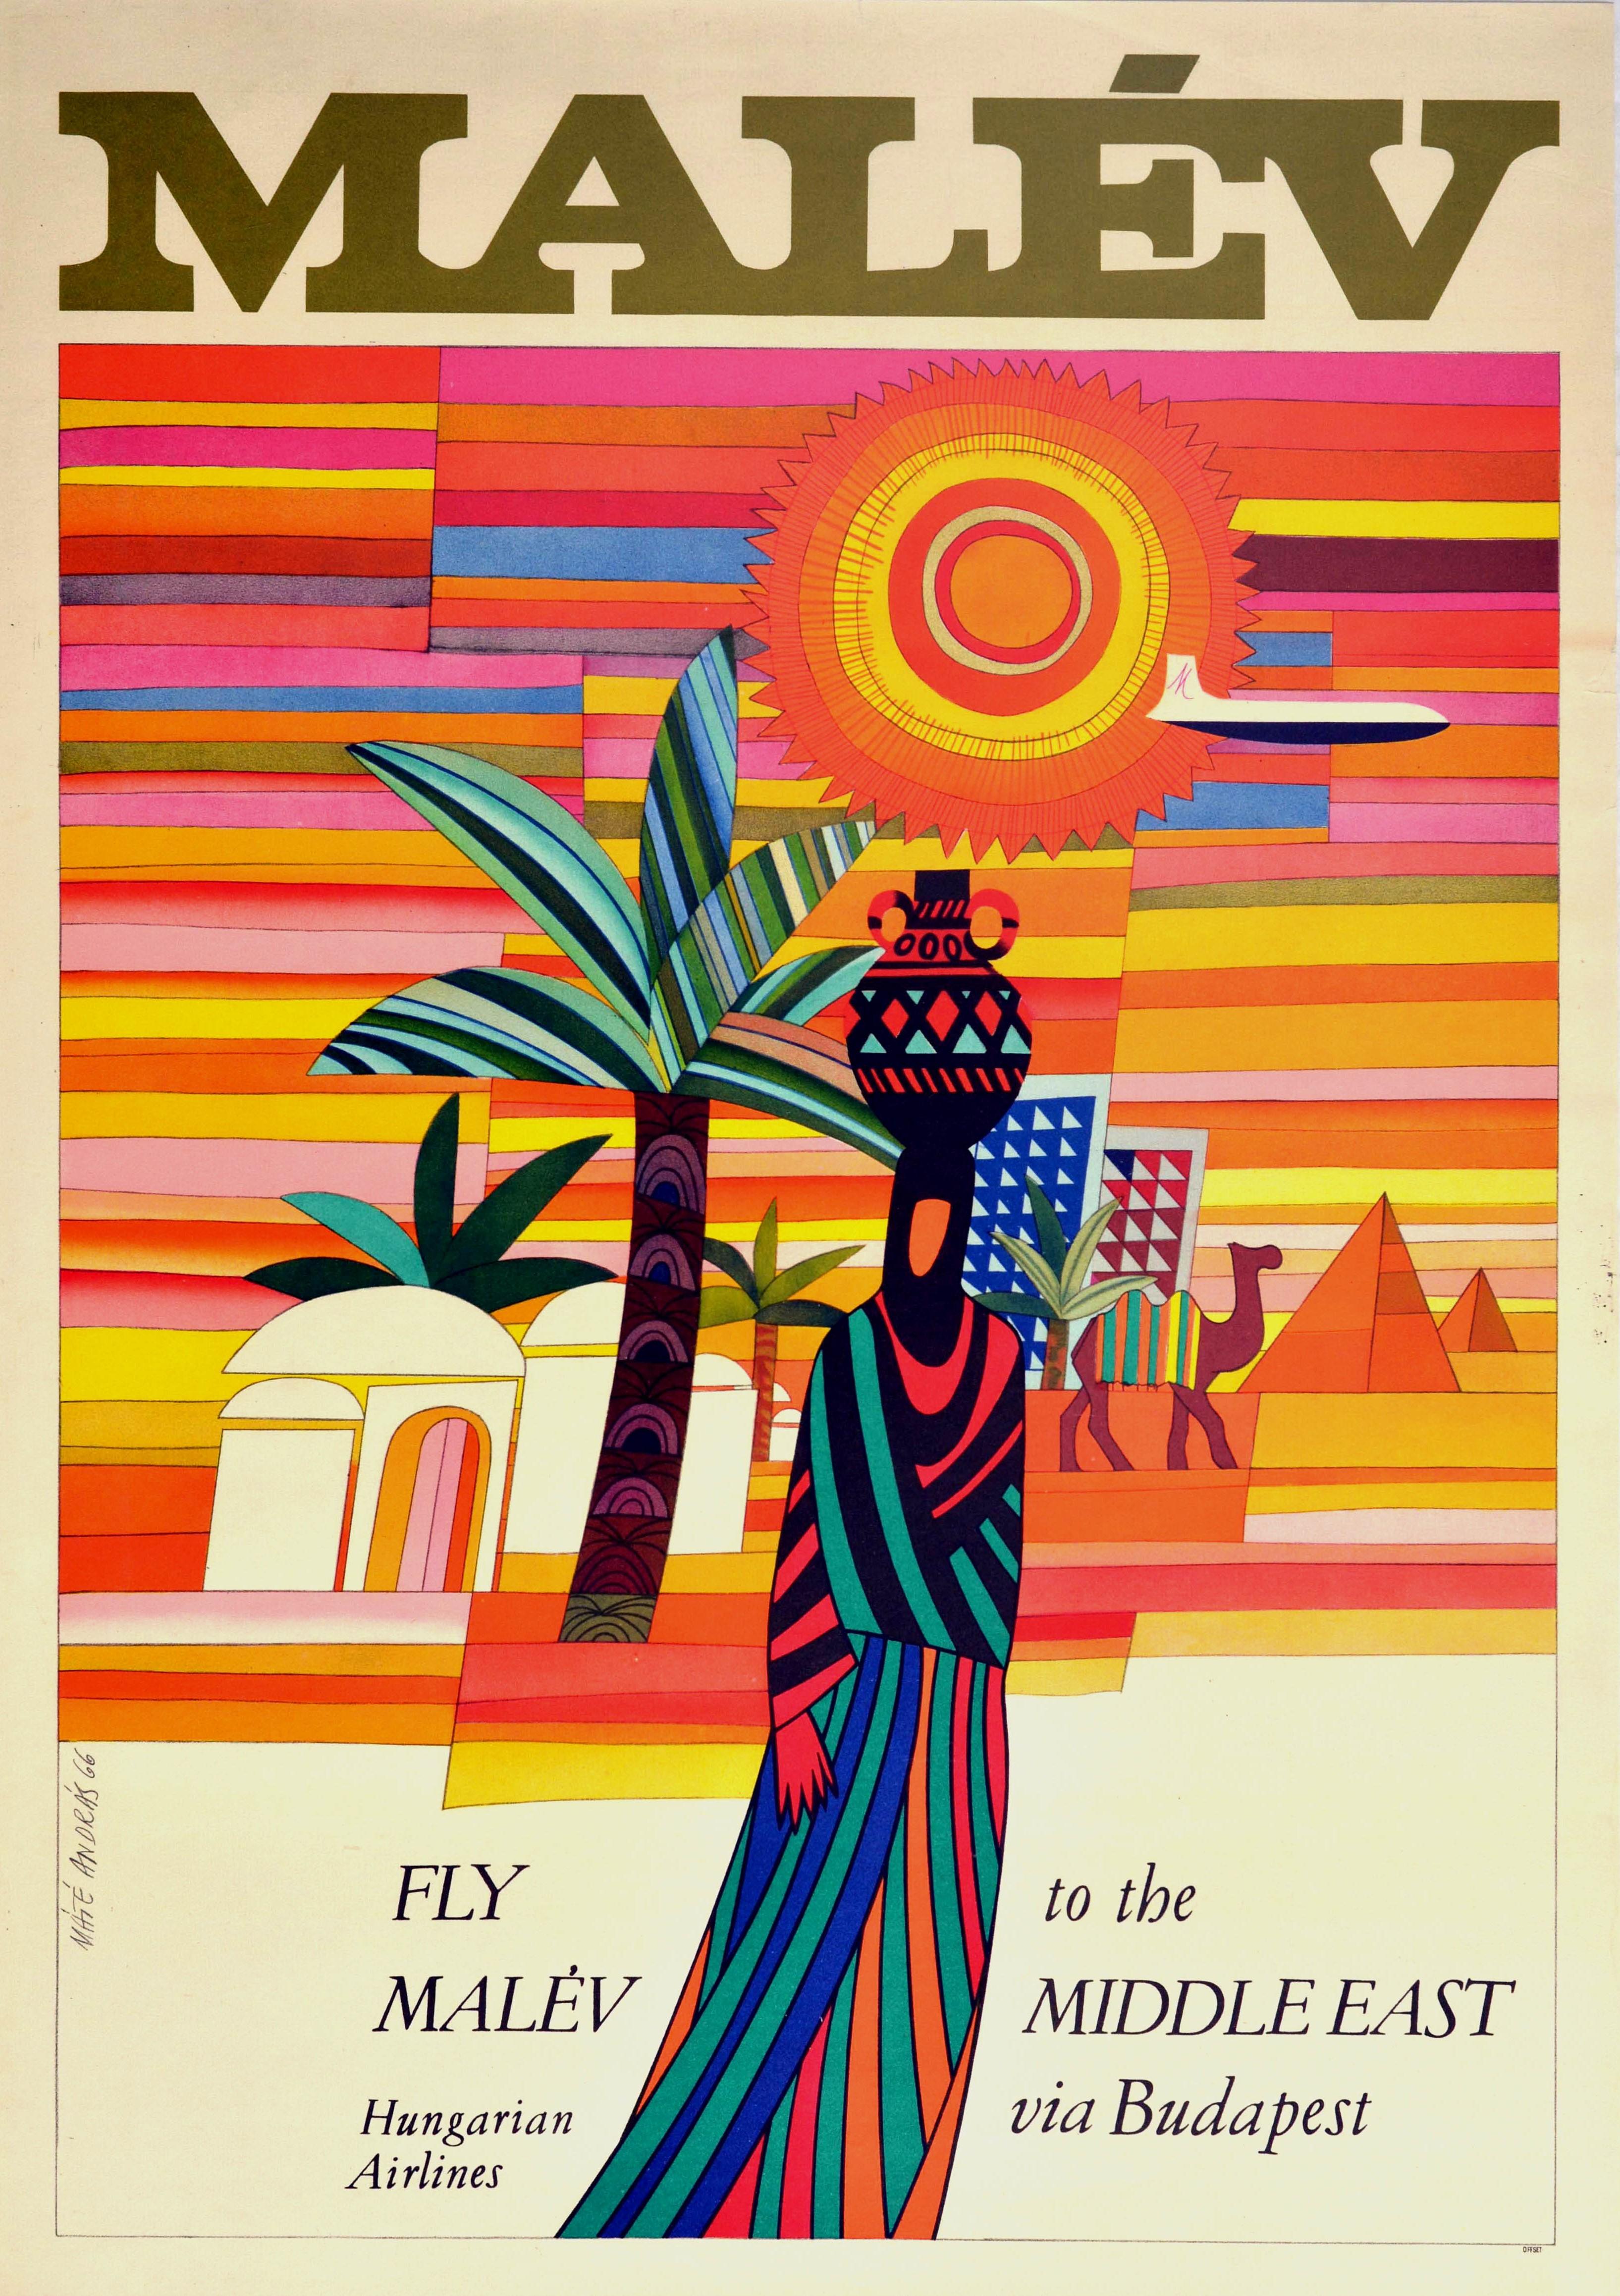 Mate Andras Print - Original Vintage Poster Fly Malev Hungarian Airlines To Middle East Via Budapest